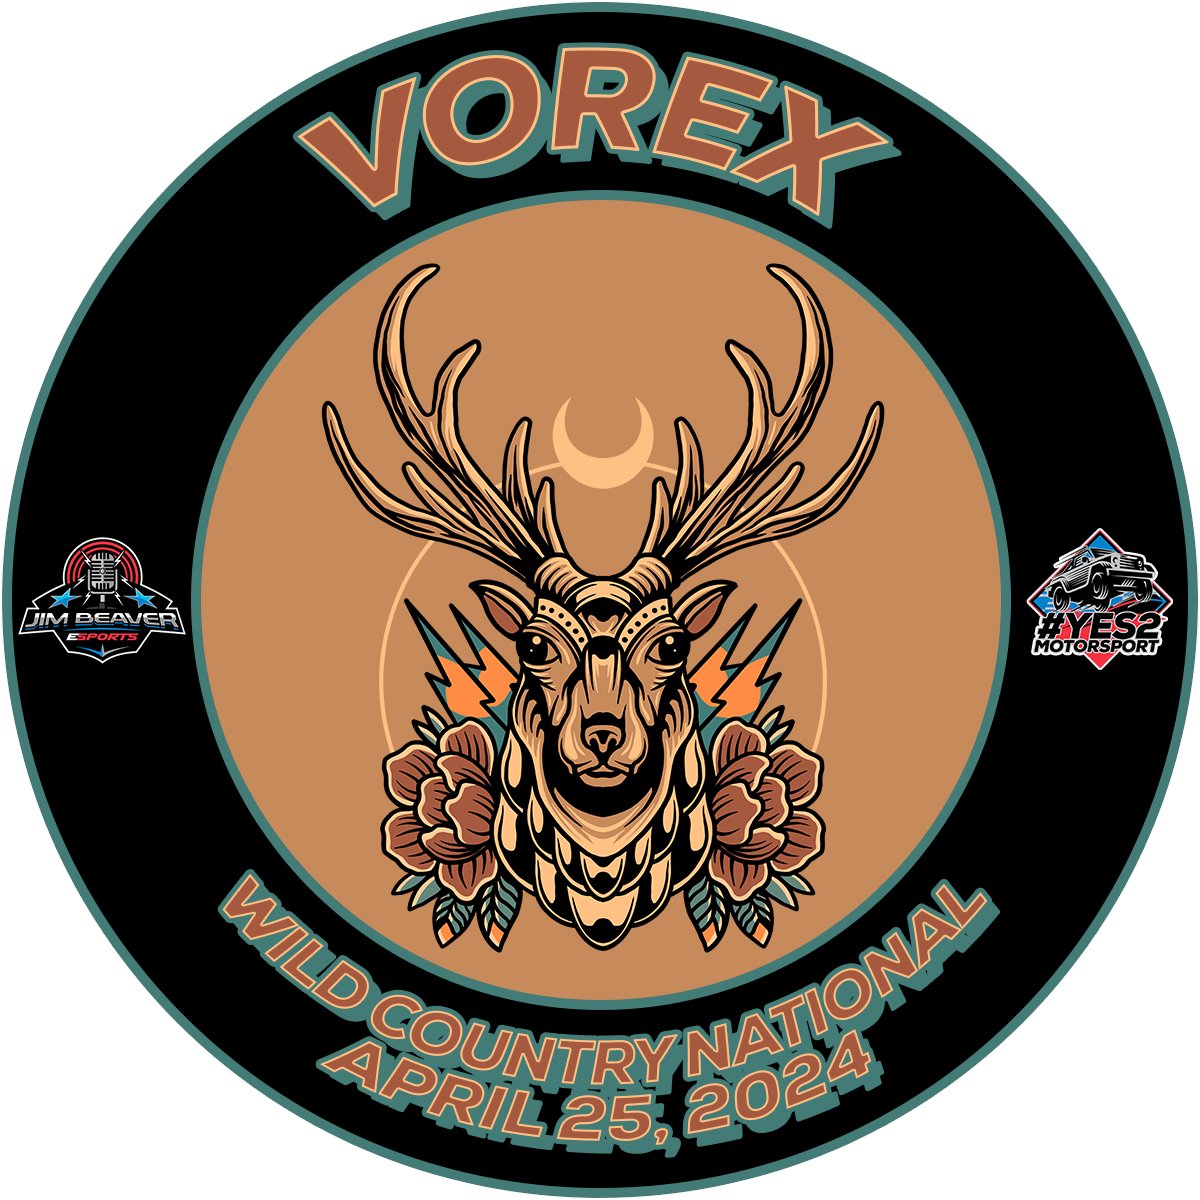 ICYMI: We've moved the #VORTEX #GreatLakes100 back by a month, to May 30. It'll swap dates with the #VOREX Wild Country National, which will now run next Thursday, April 25. So you've got an extra month to find a teammate.